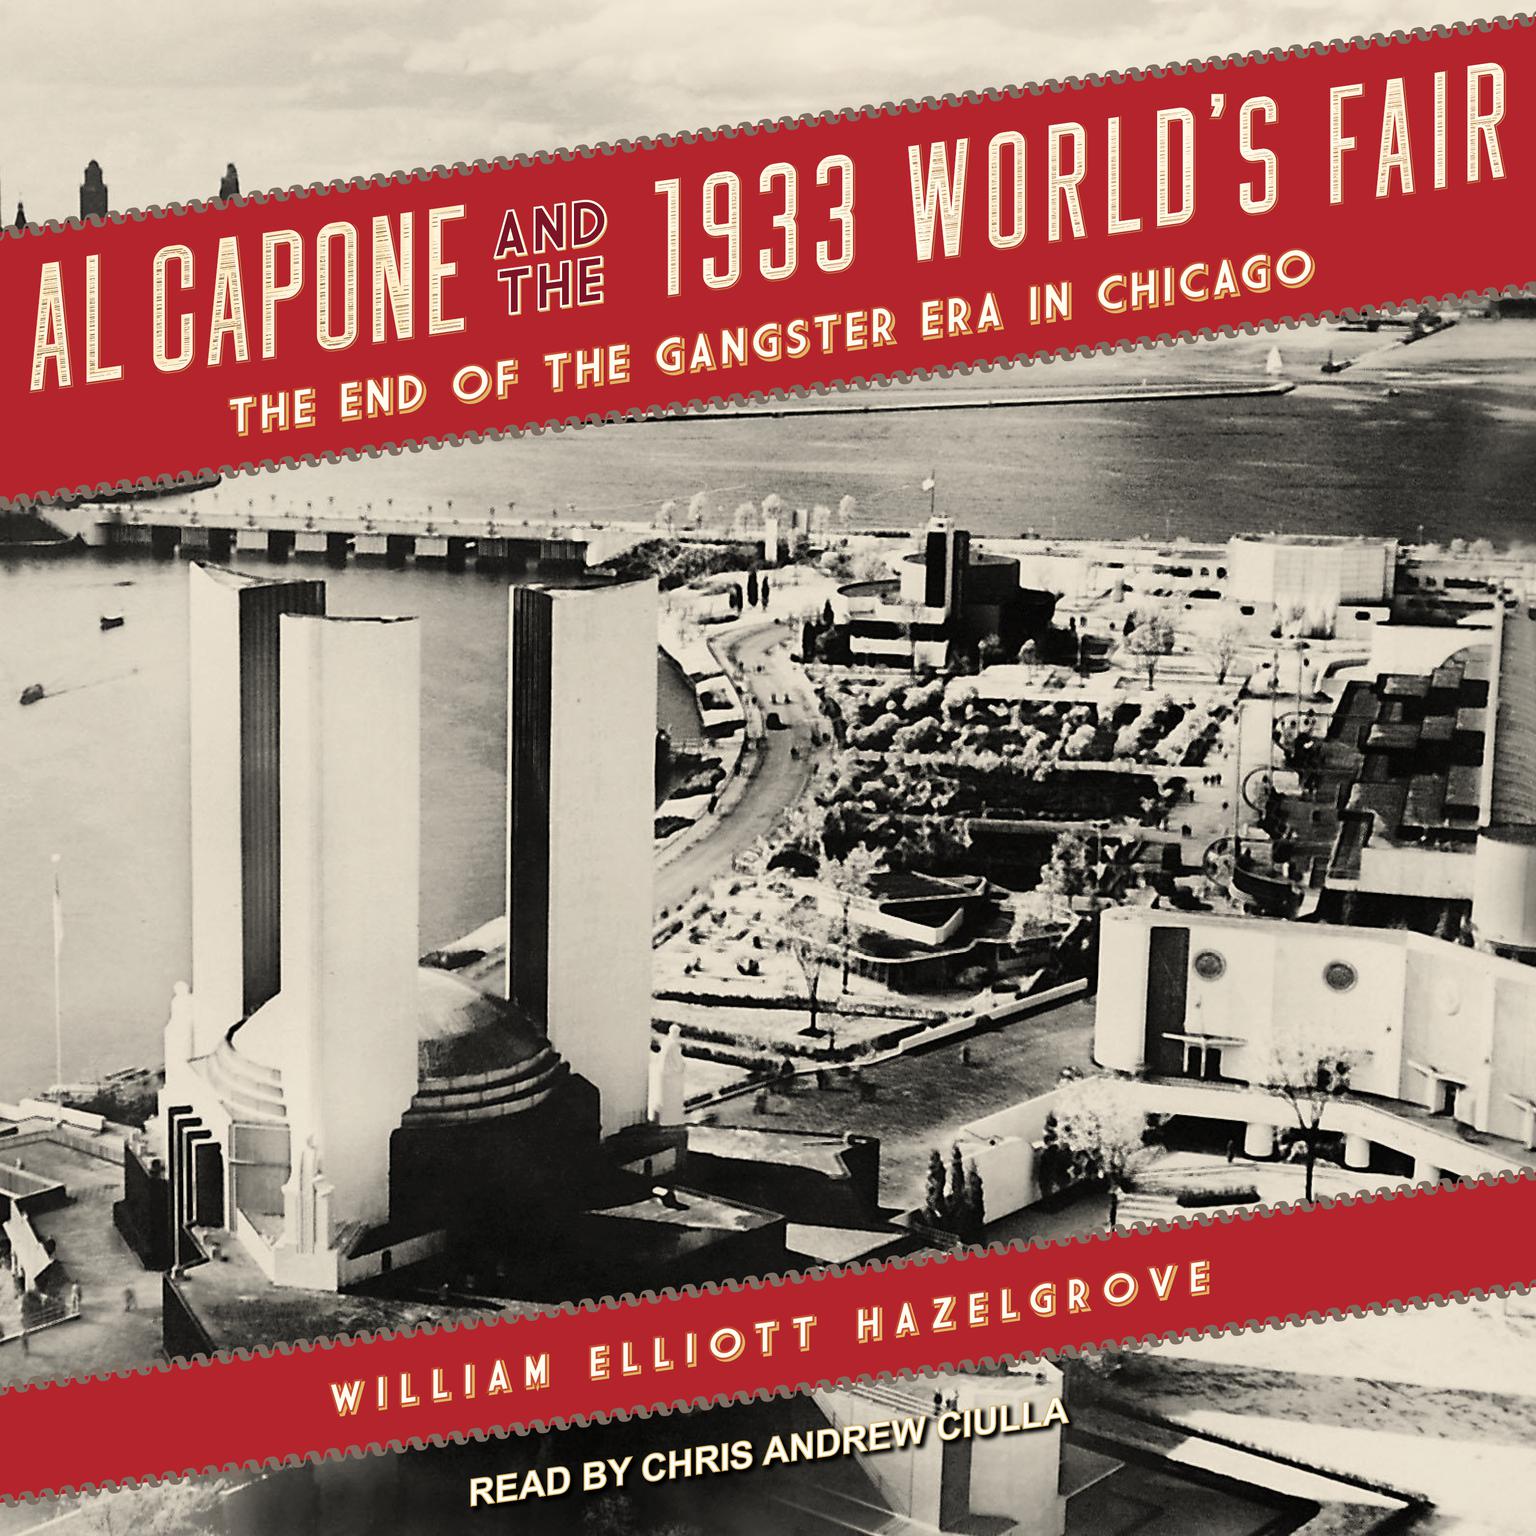 Al Capone and the 1933 Worlds Fair: The End of the Gangster Era in Chicago Audiobook, by William Elliott Hazelgrove